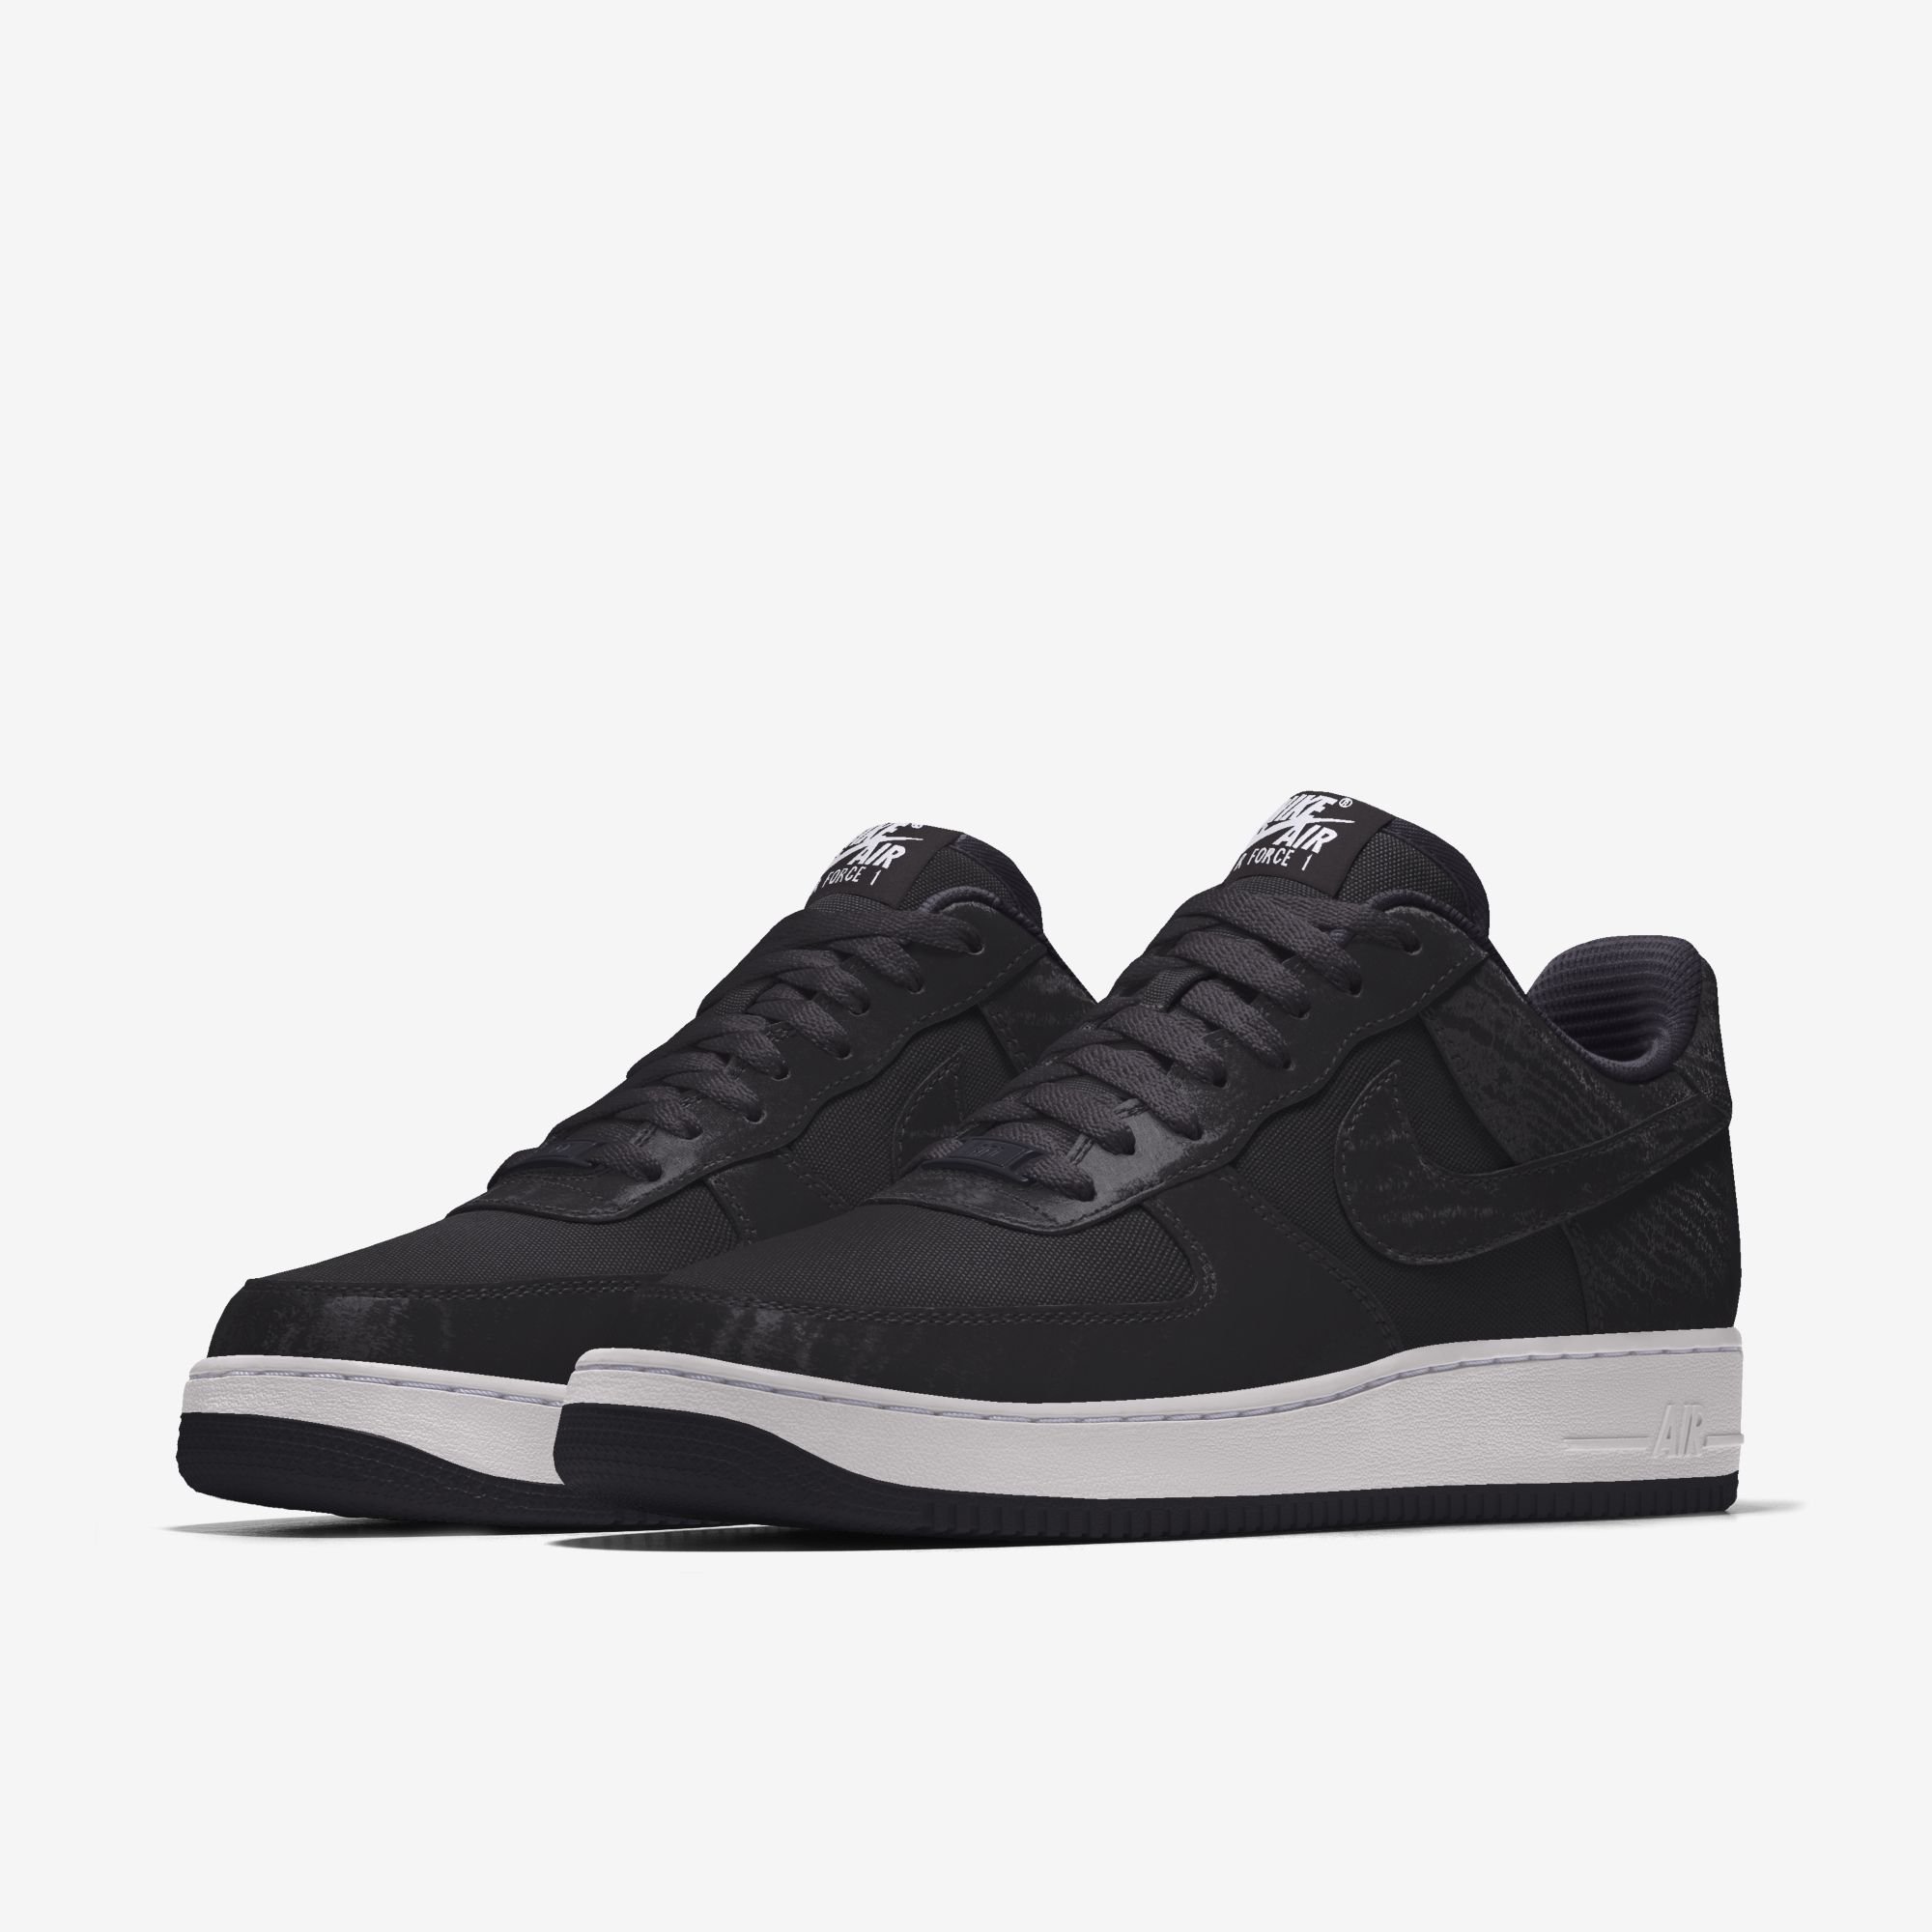  Nike Air Force 1 Low By You - Black Satin / Black Canvas 